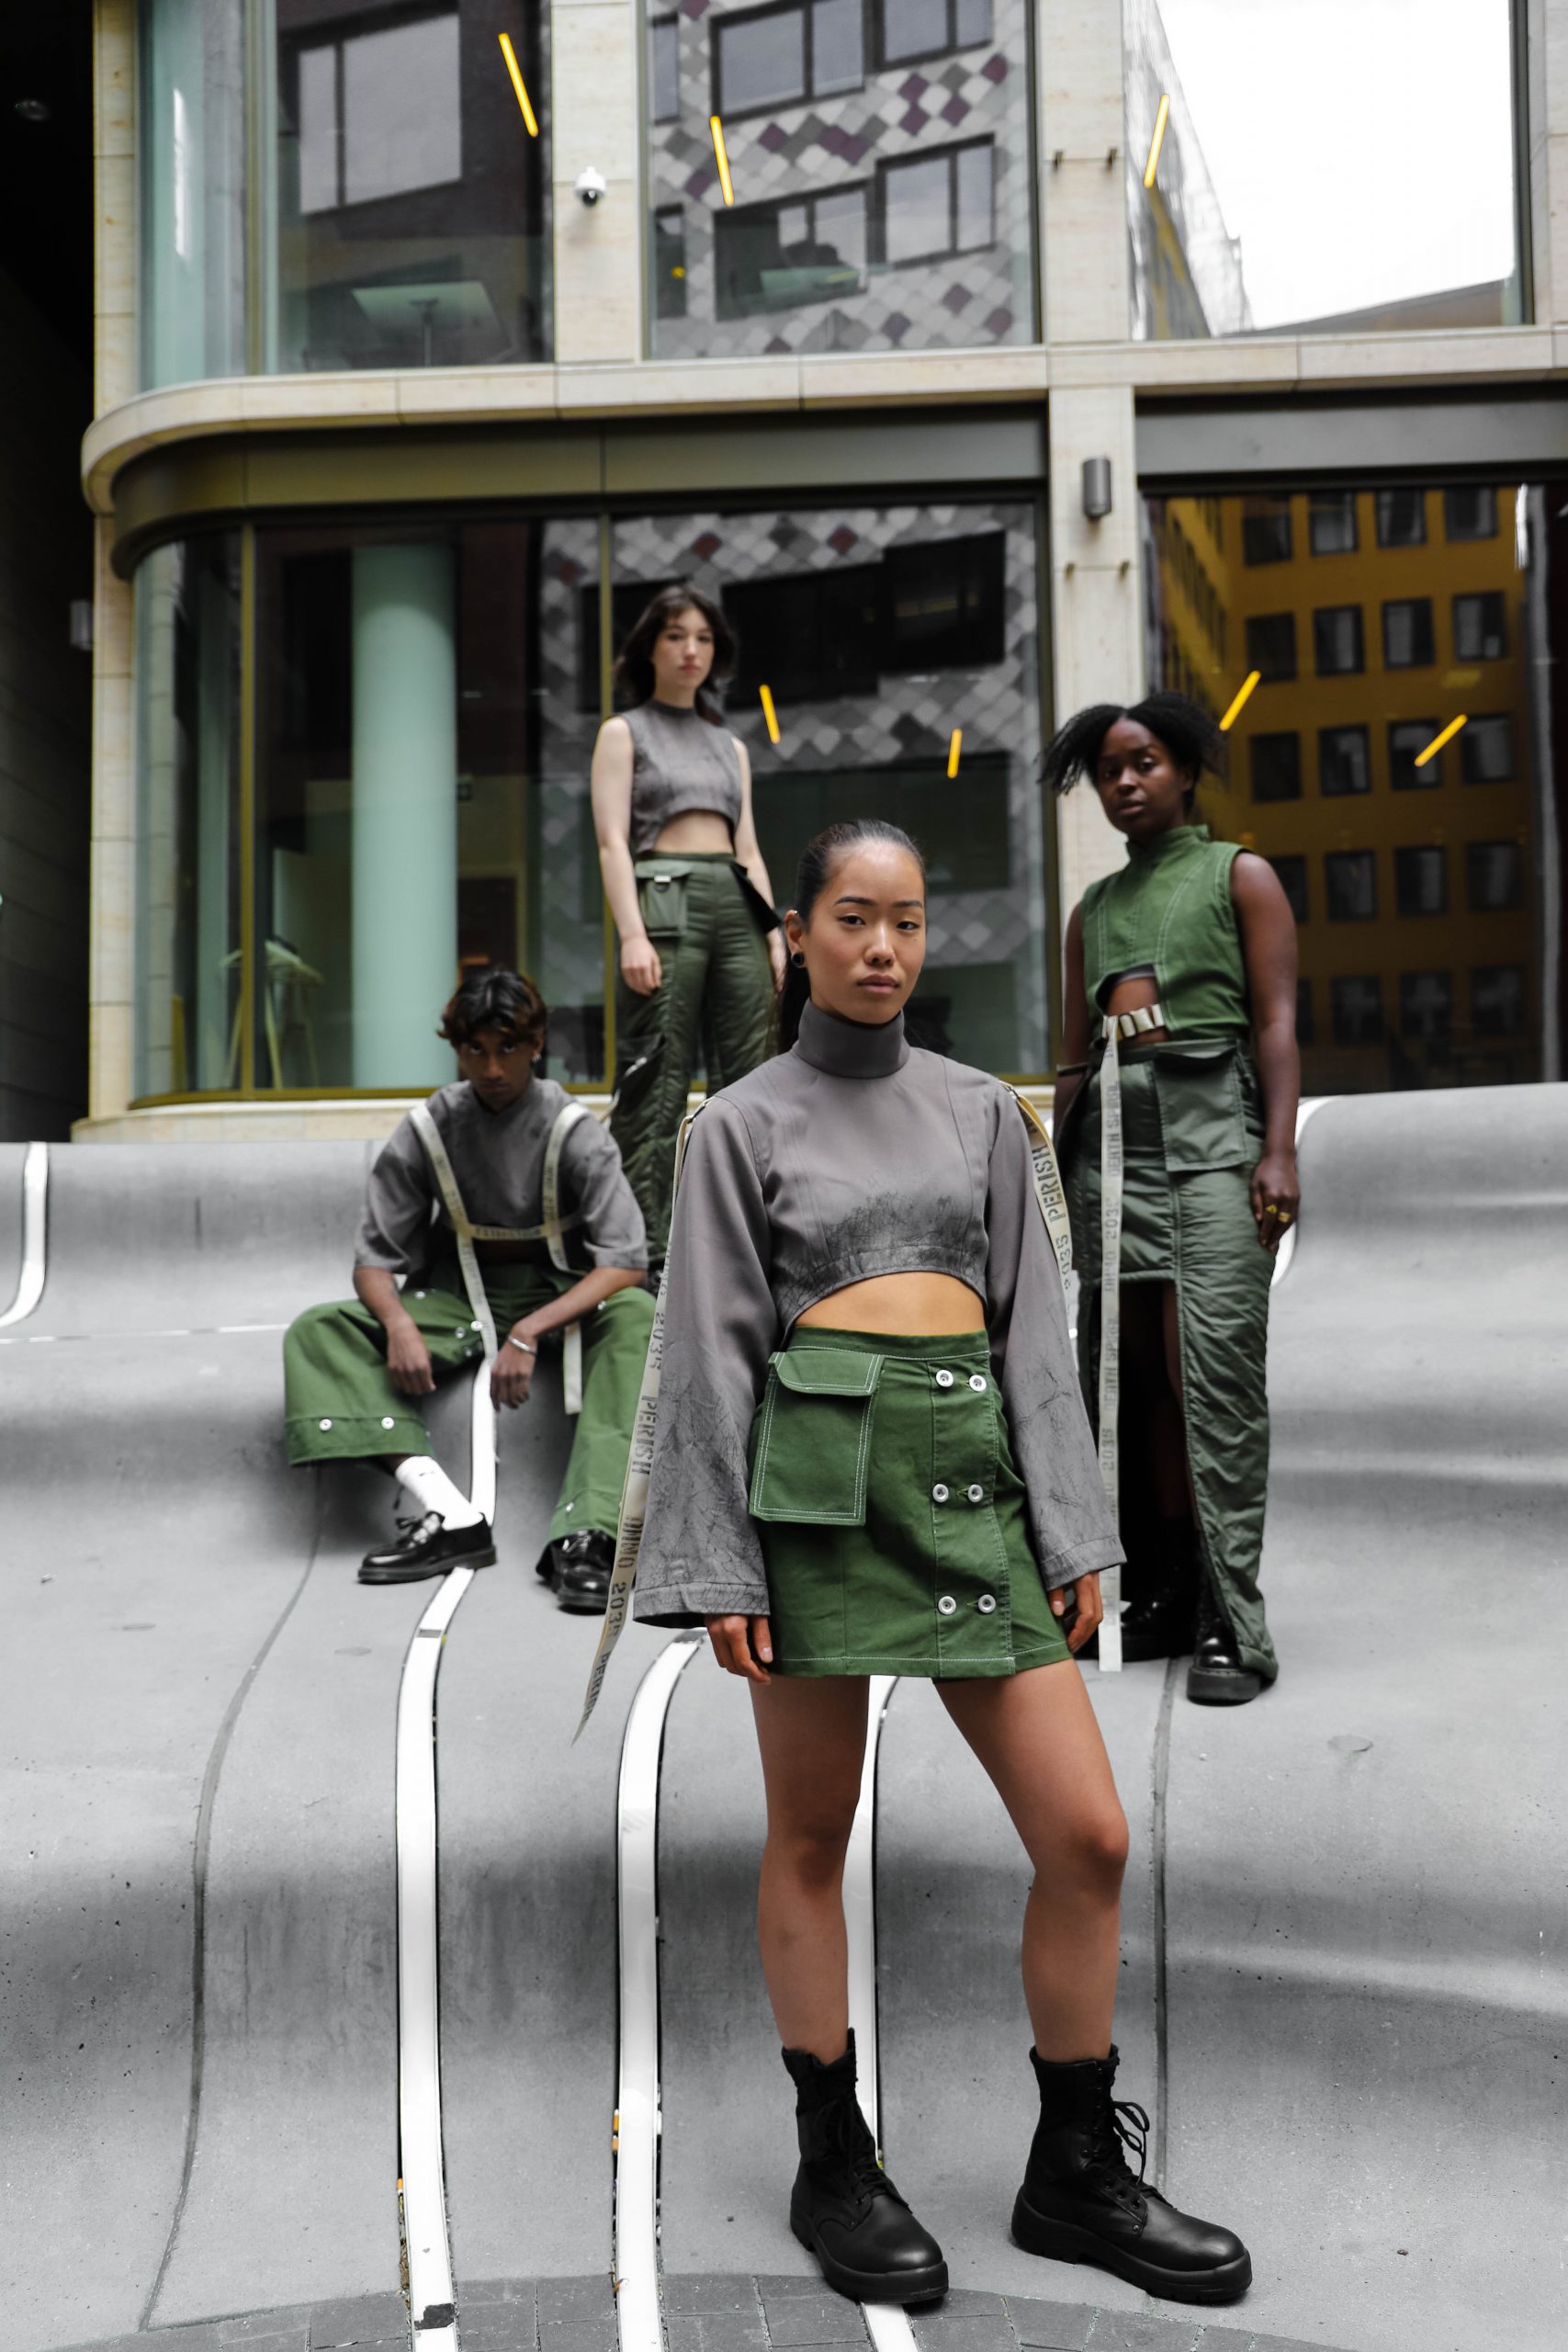 Group photo, four people standing different distance to viewer wearing cropped tops in green and grey with white straps/belts and green skirts and pants with pocket and button details.